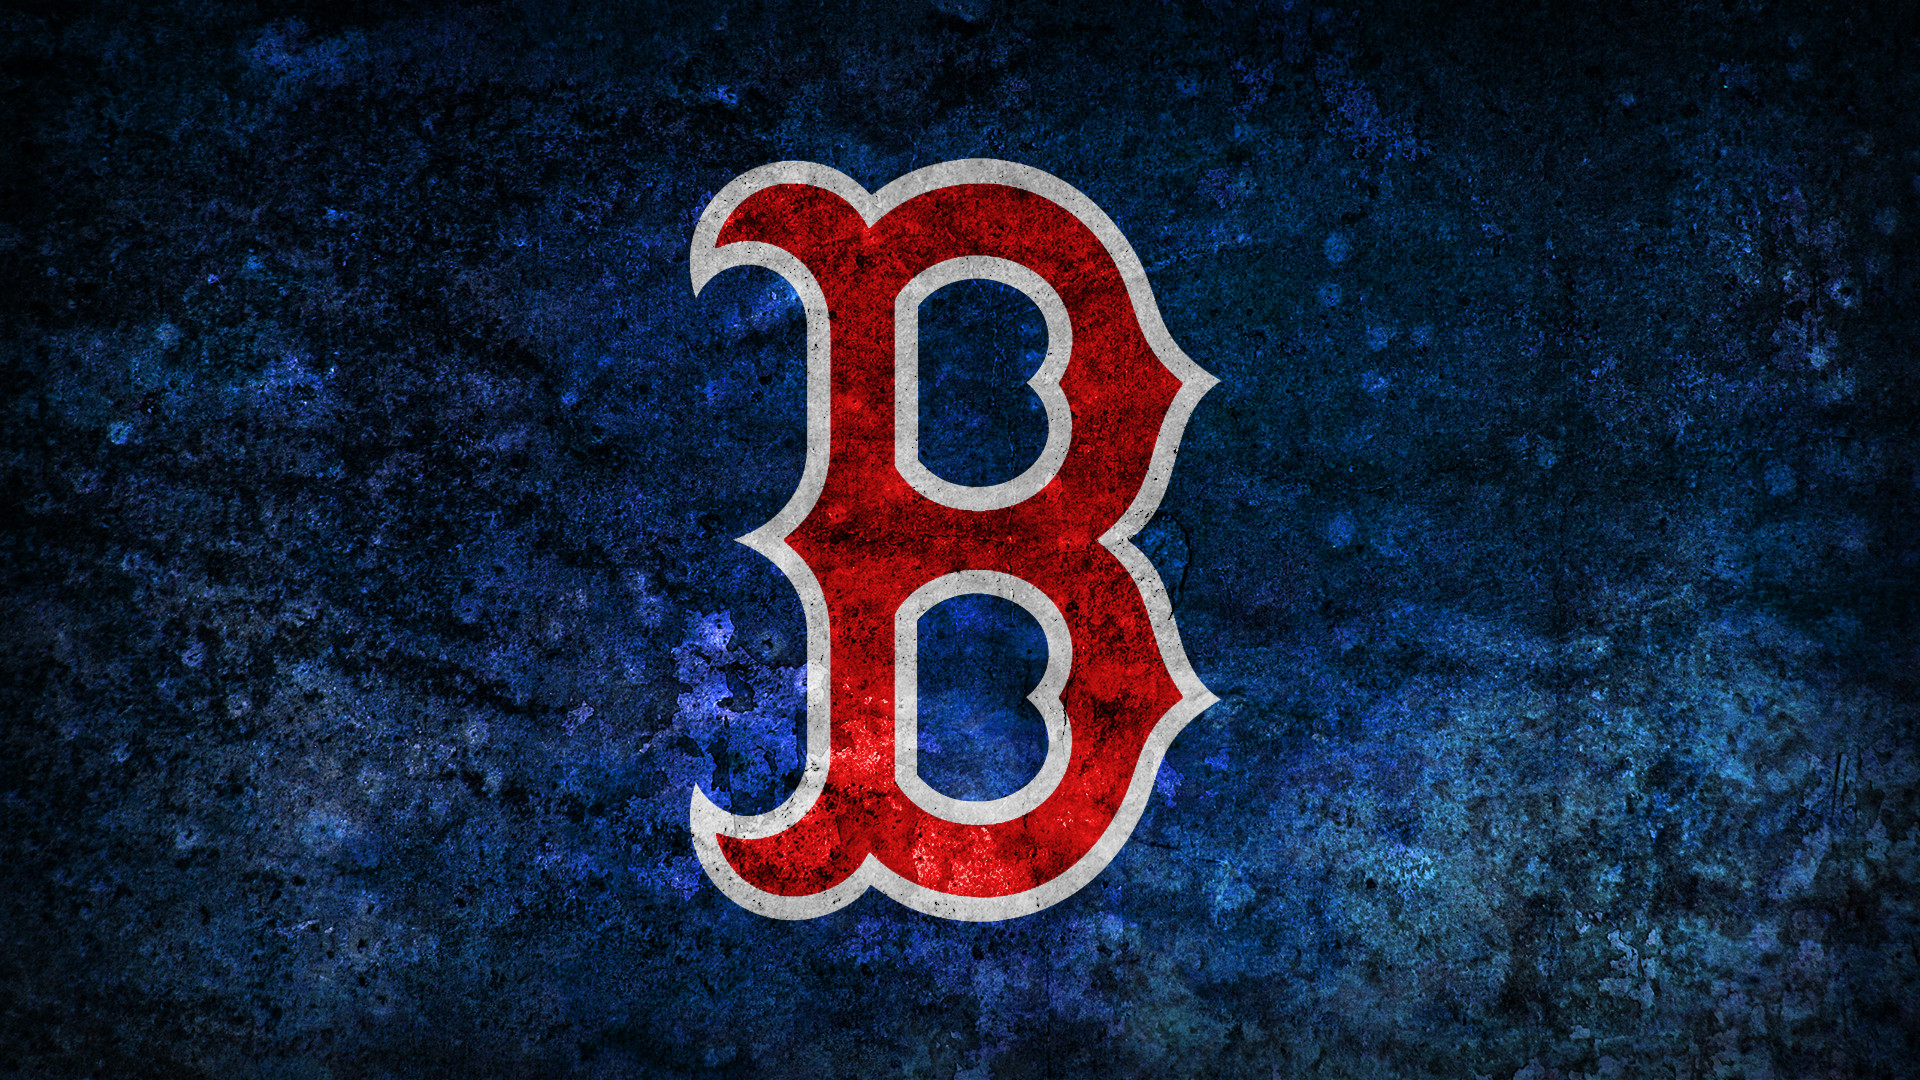 Boston Red Sox  City Connect uniforms with the wallpapers  Facebook